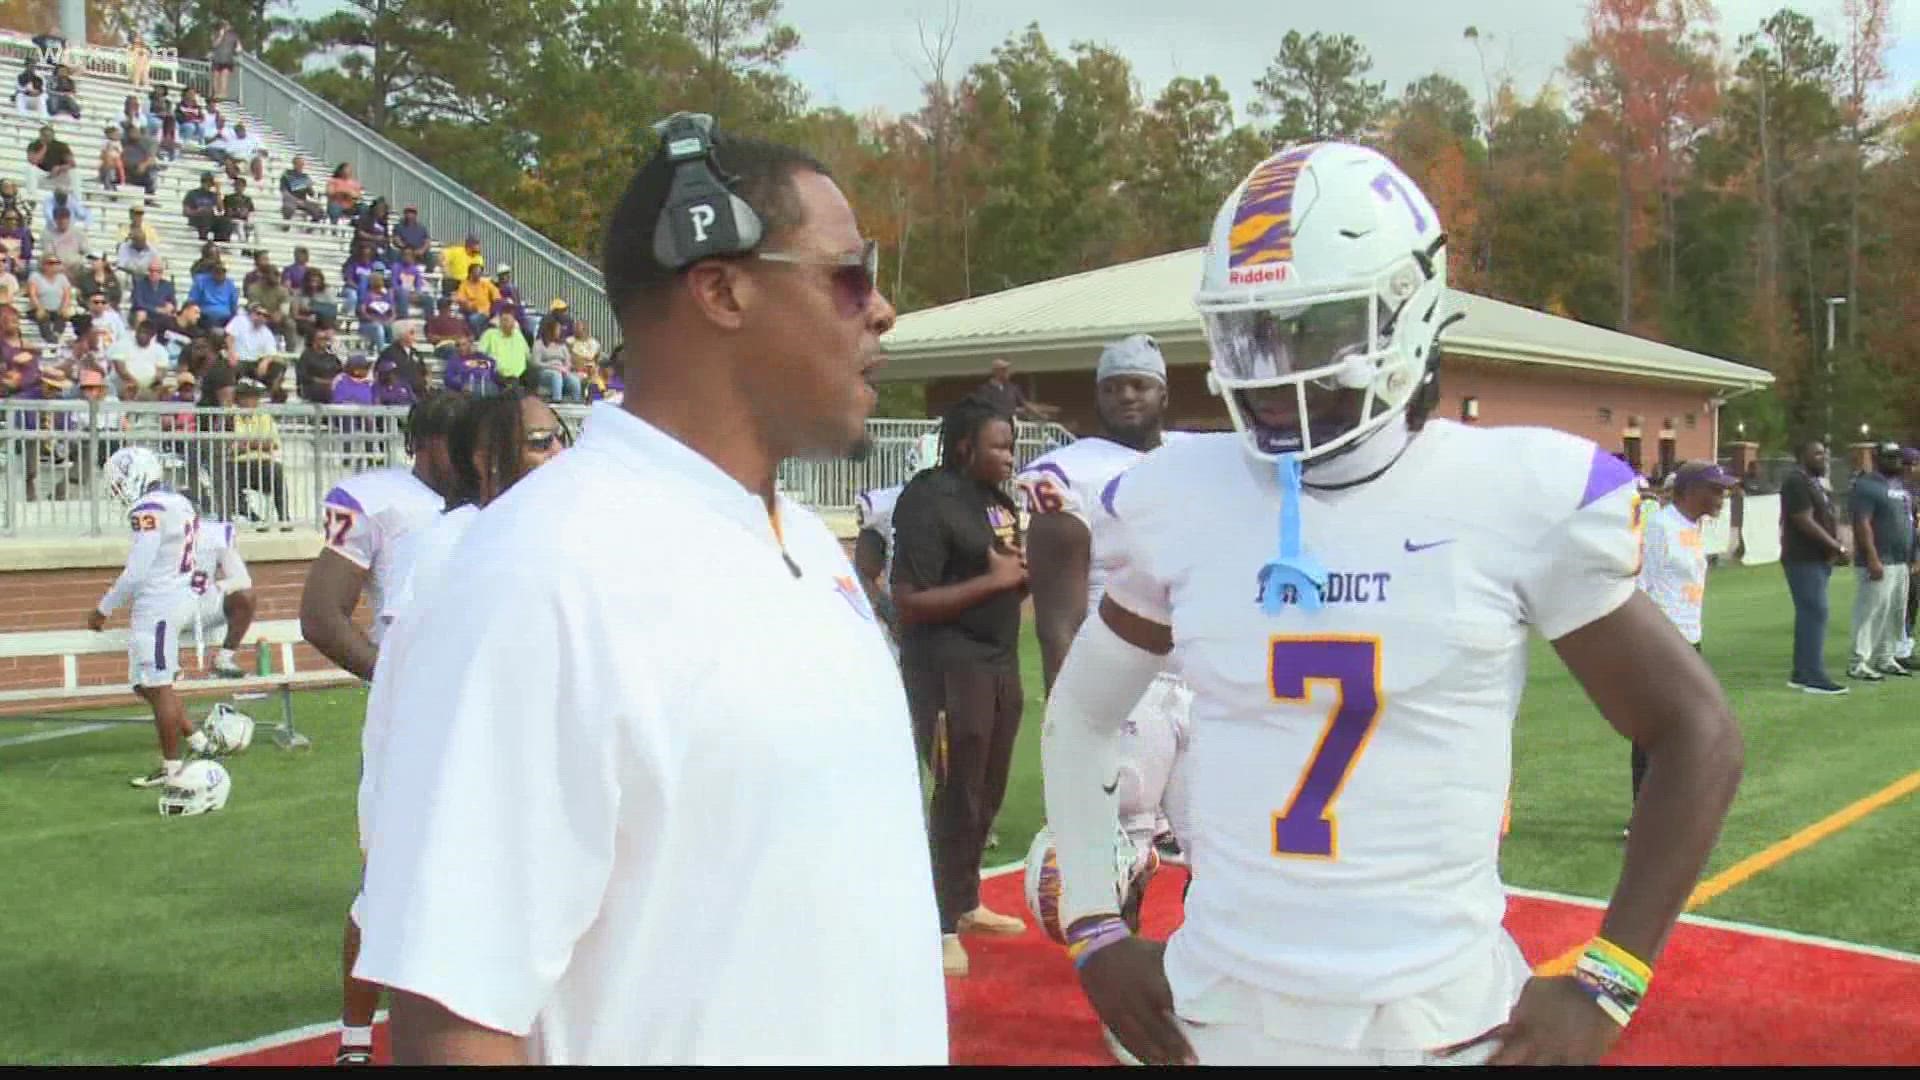 Highlights and reaction from Benedict College after the 54-21 win over Allen University which ran the Tigers' record to 10-0.